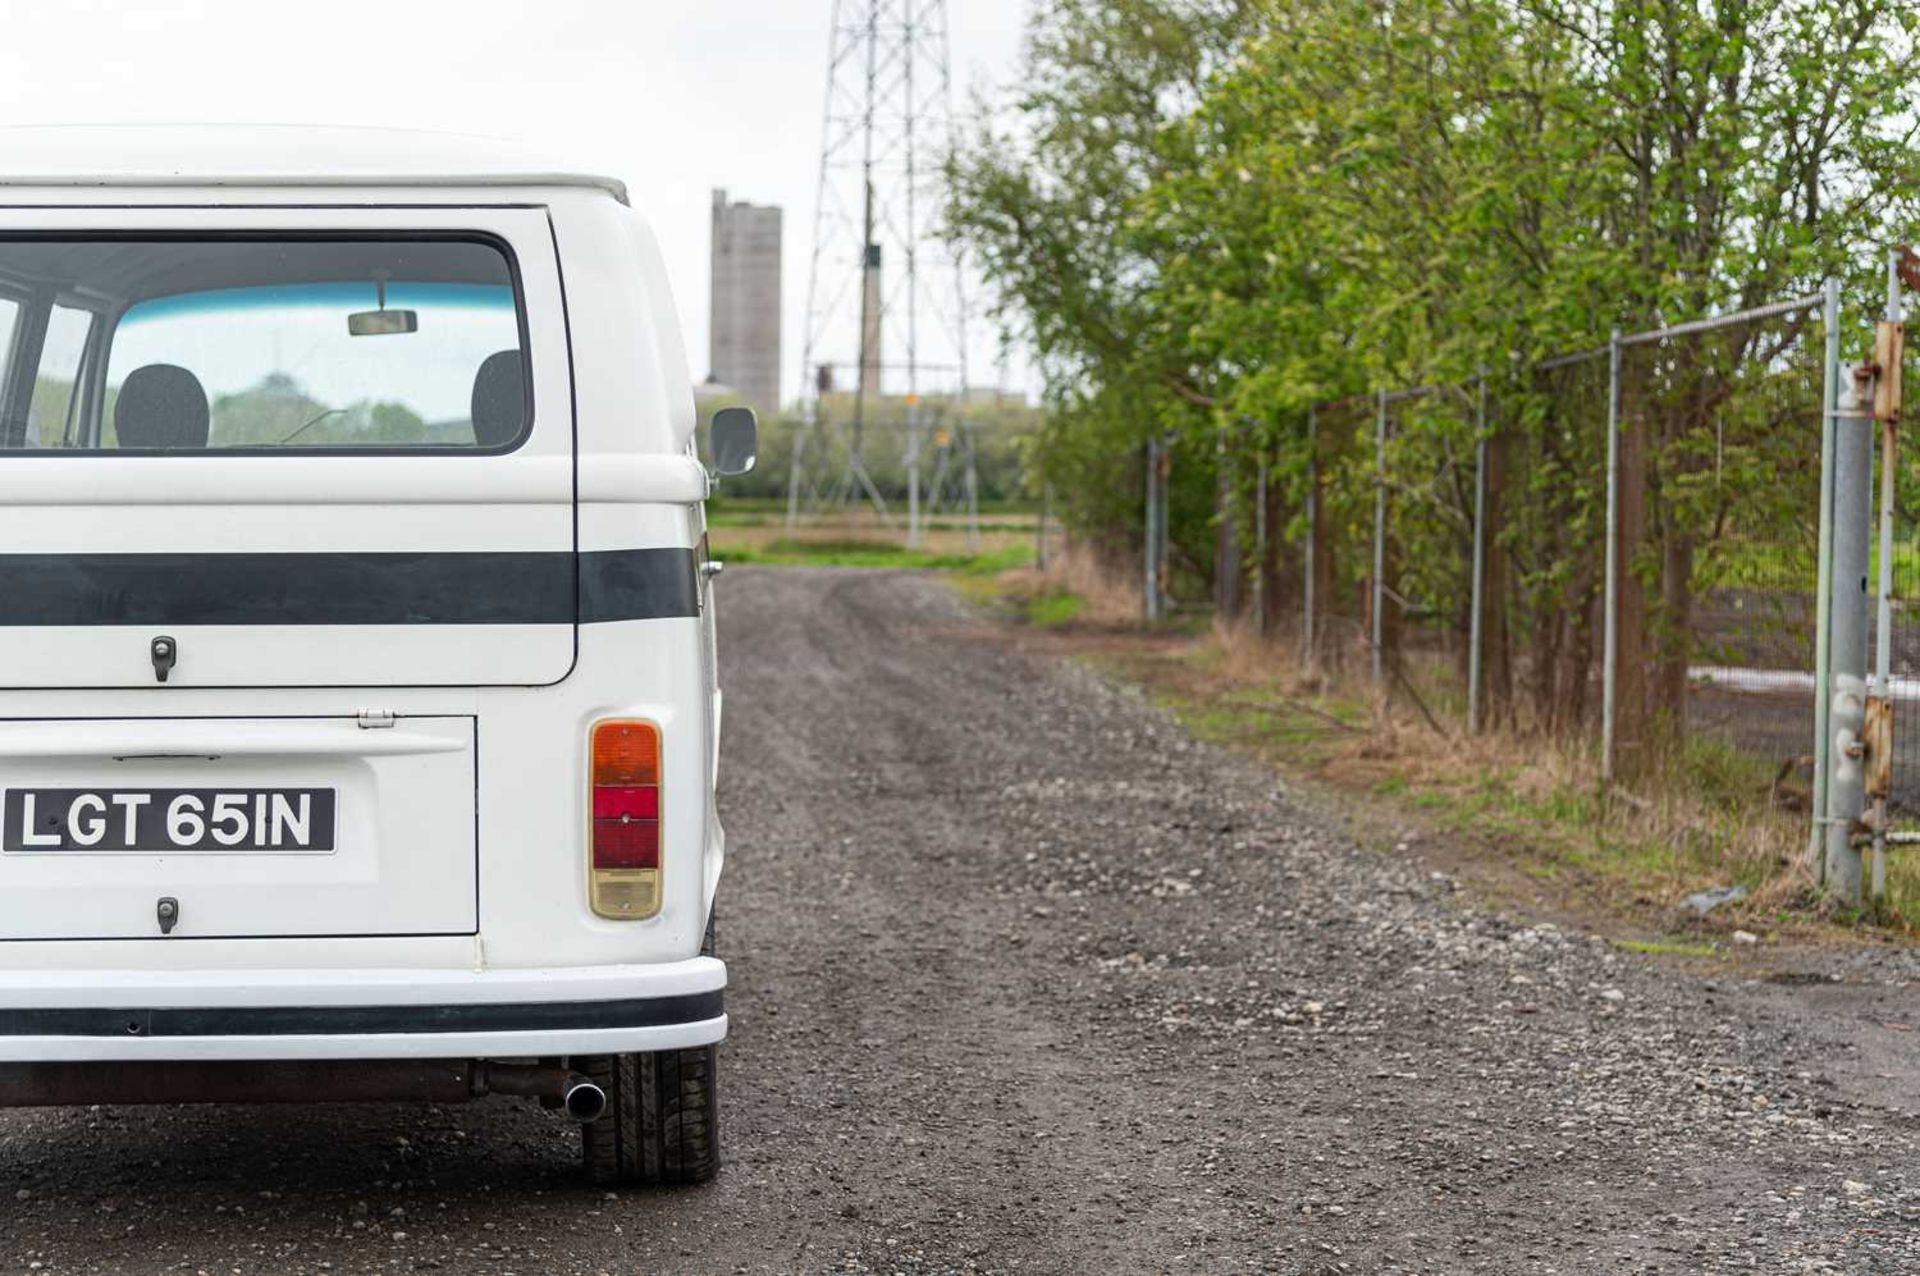 1975 VW T2 Transporter Recently repatriated from the car-friendly climate of South Africa - Image 9 of 60